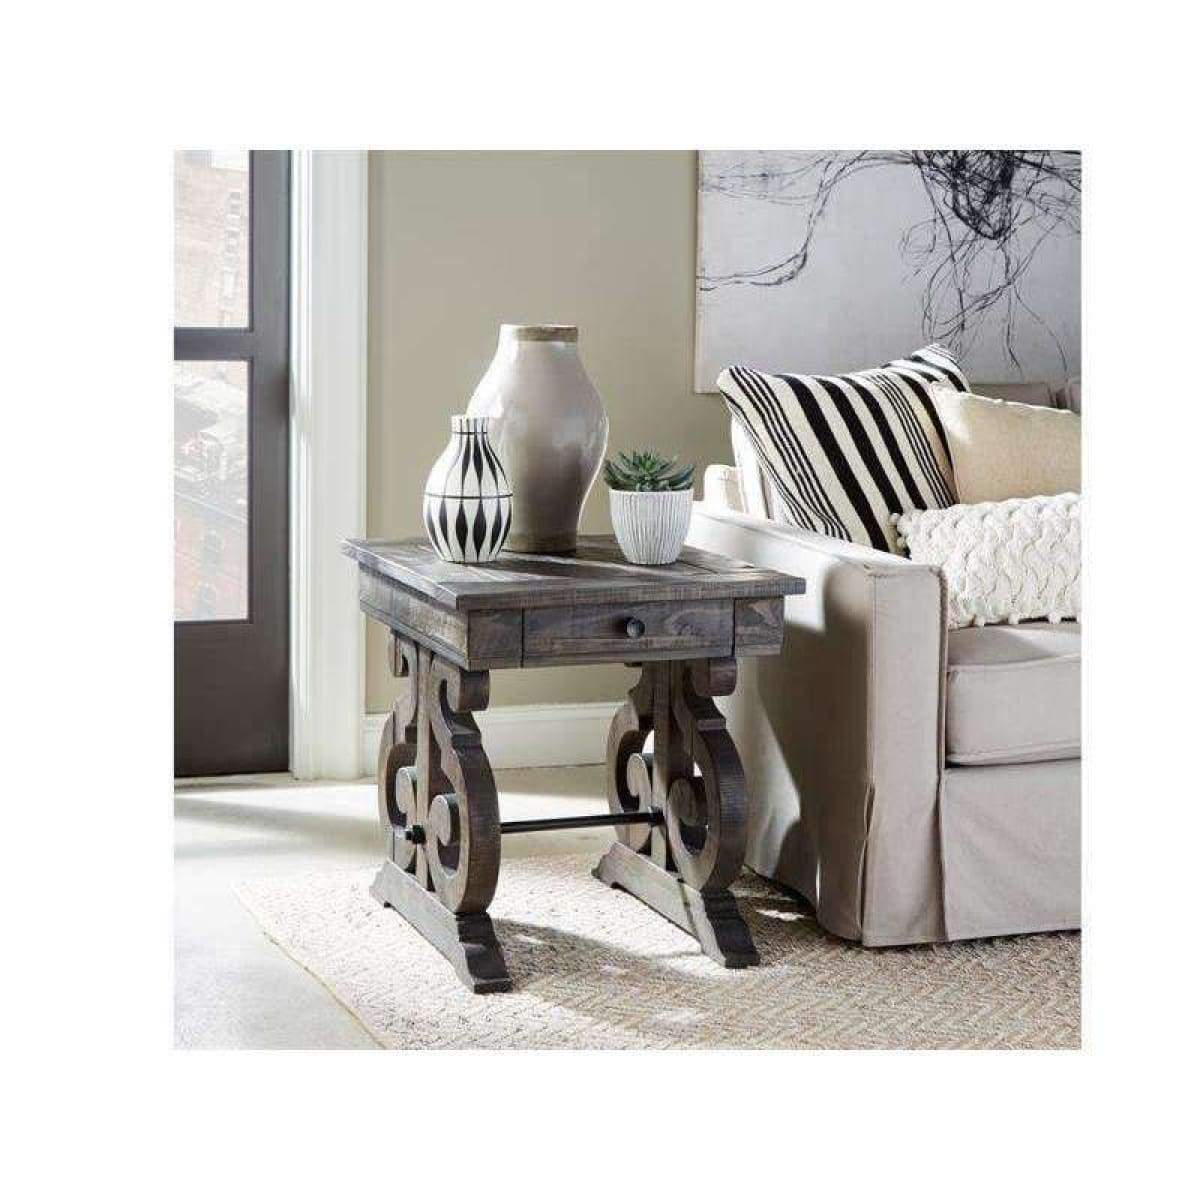 Bellamy Rectangular End Table - END TABLE/SIDE TABLE